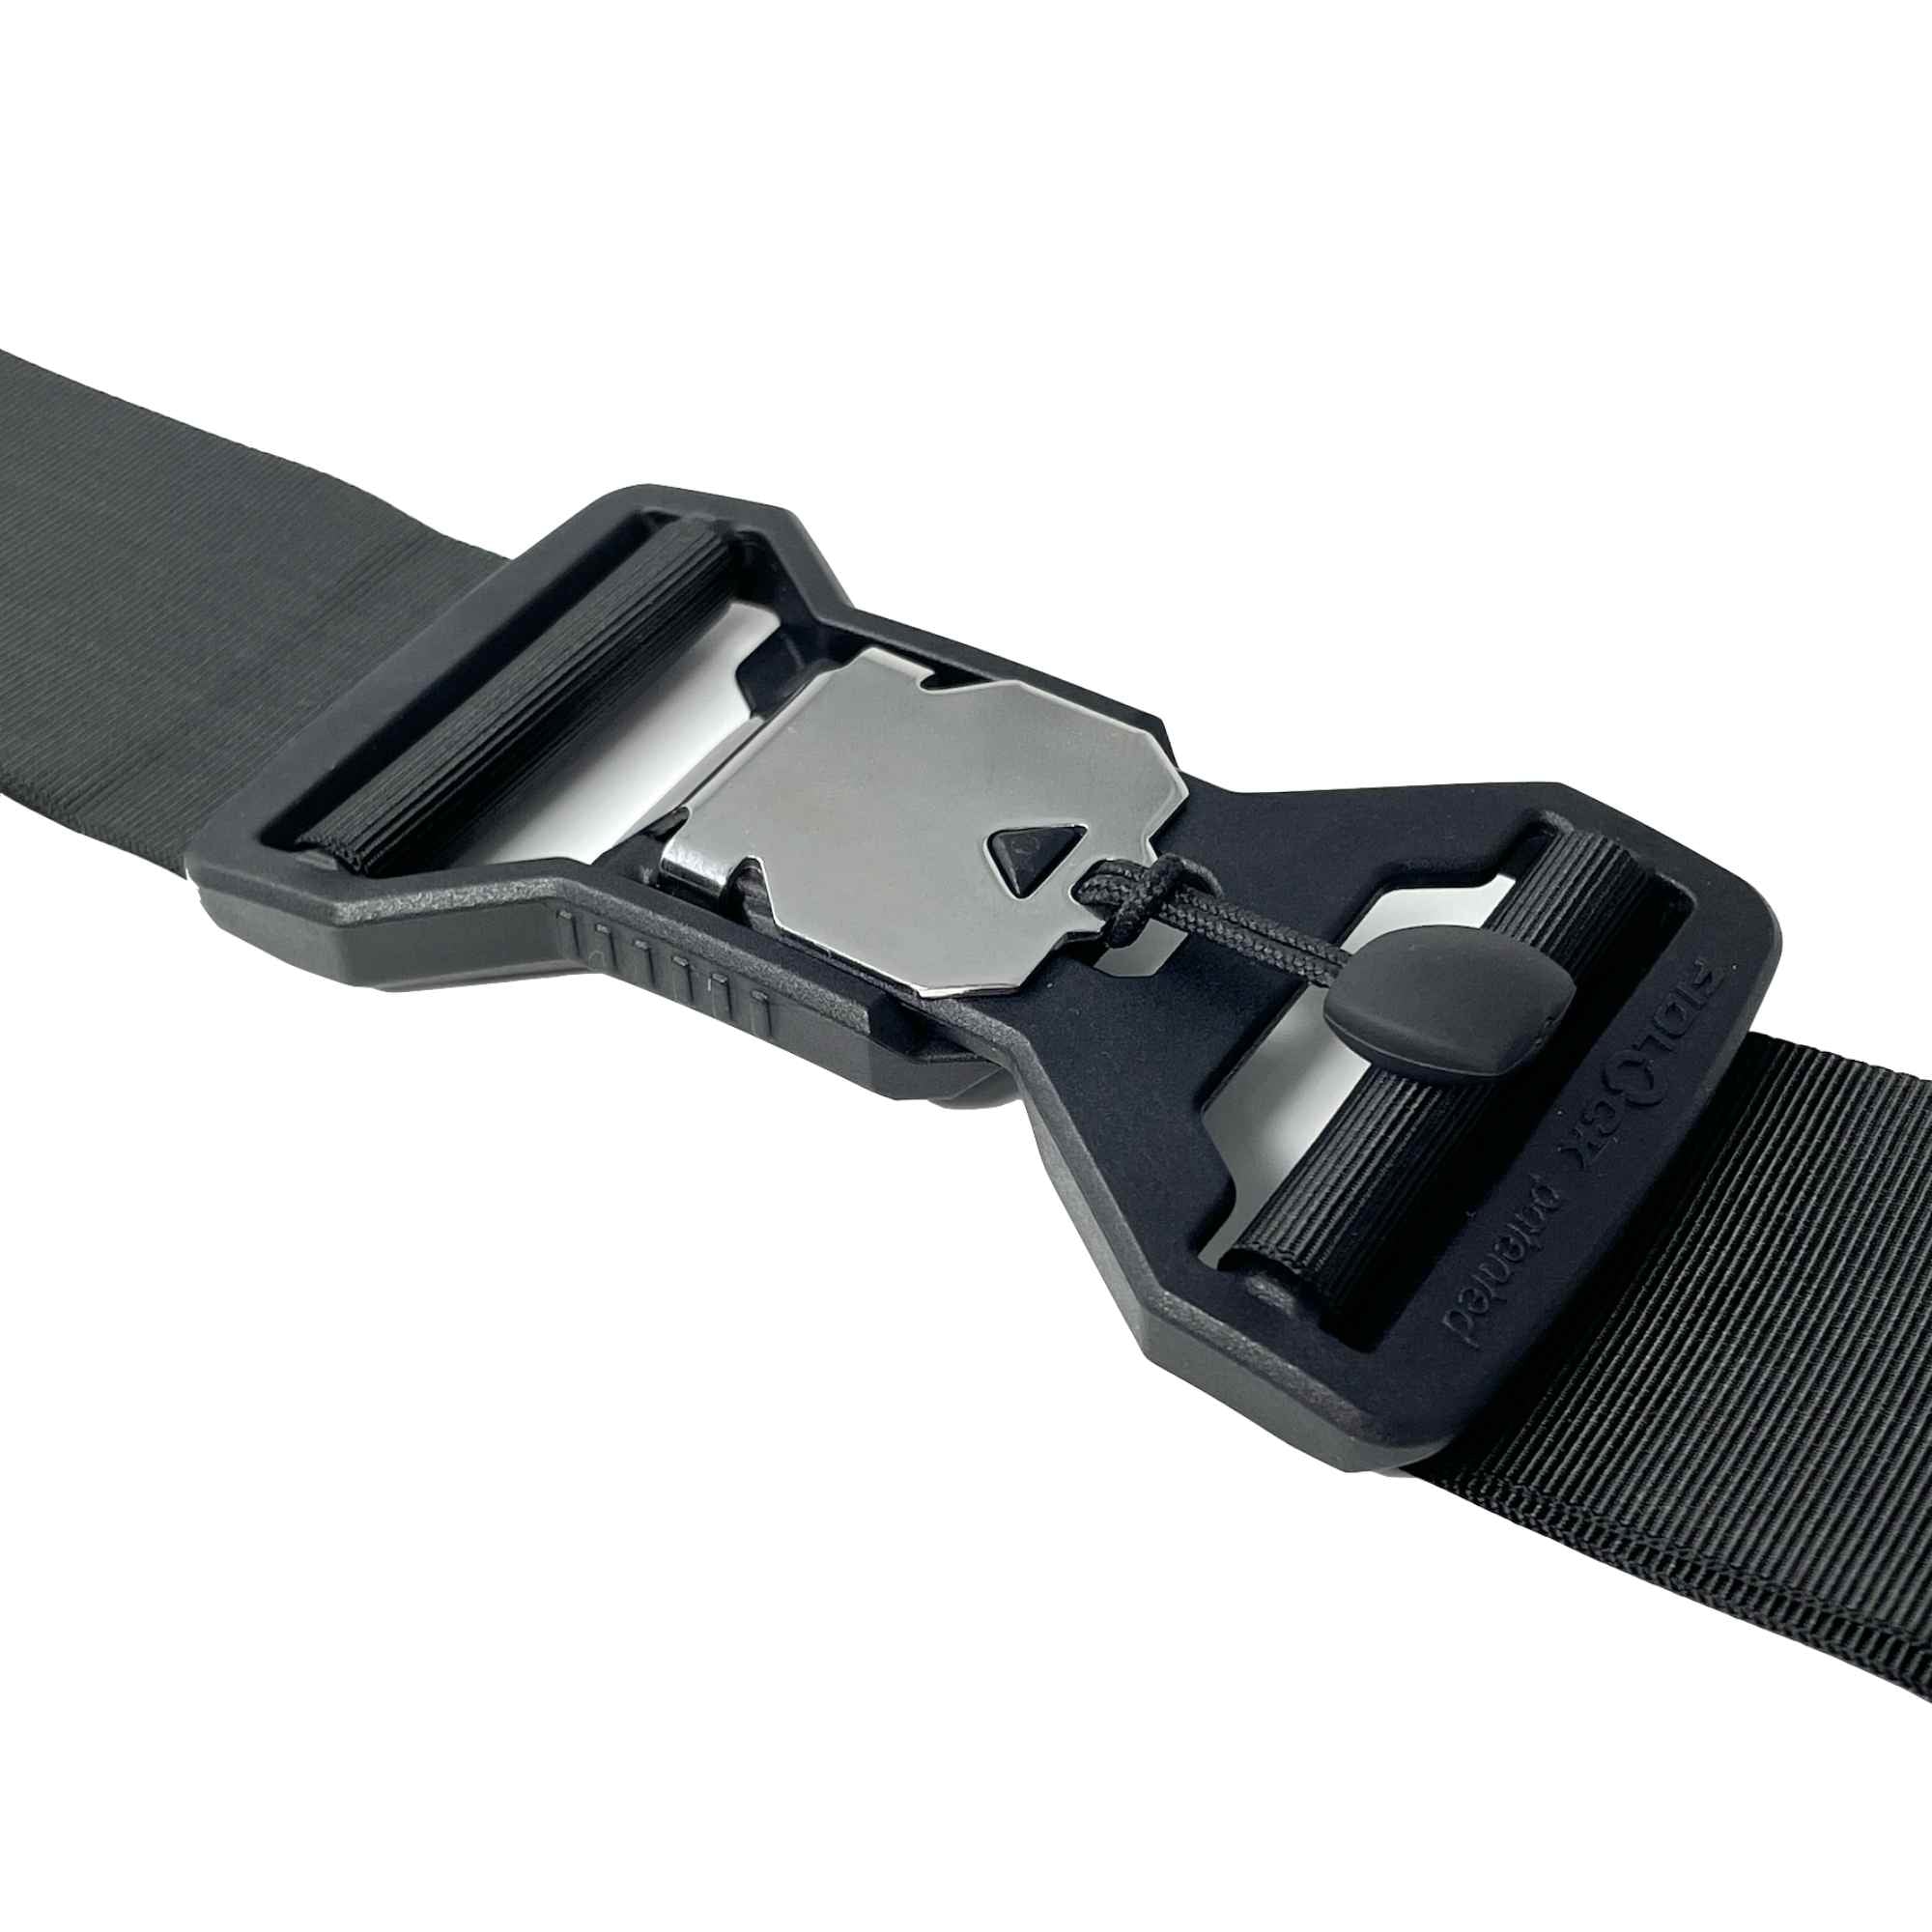 Black)Andrew Nylon Strap With Buckle Fixing Strapping Belts Luggage Straps